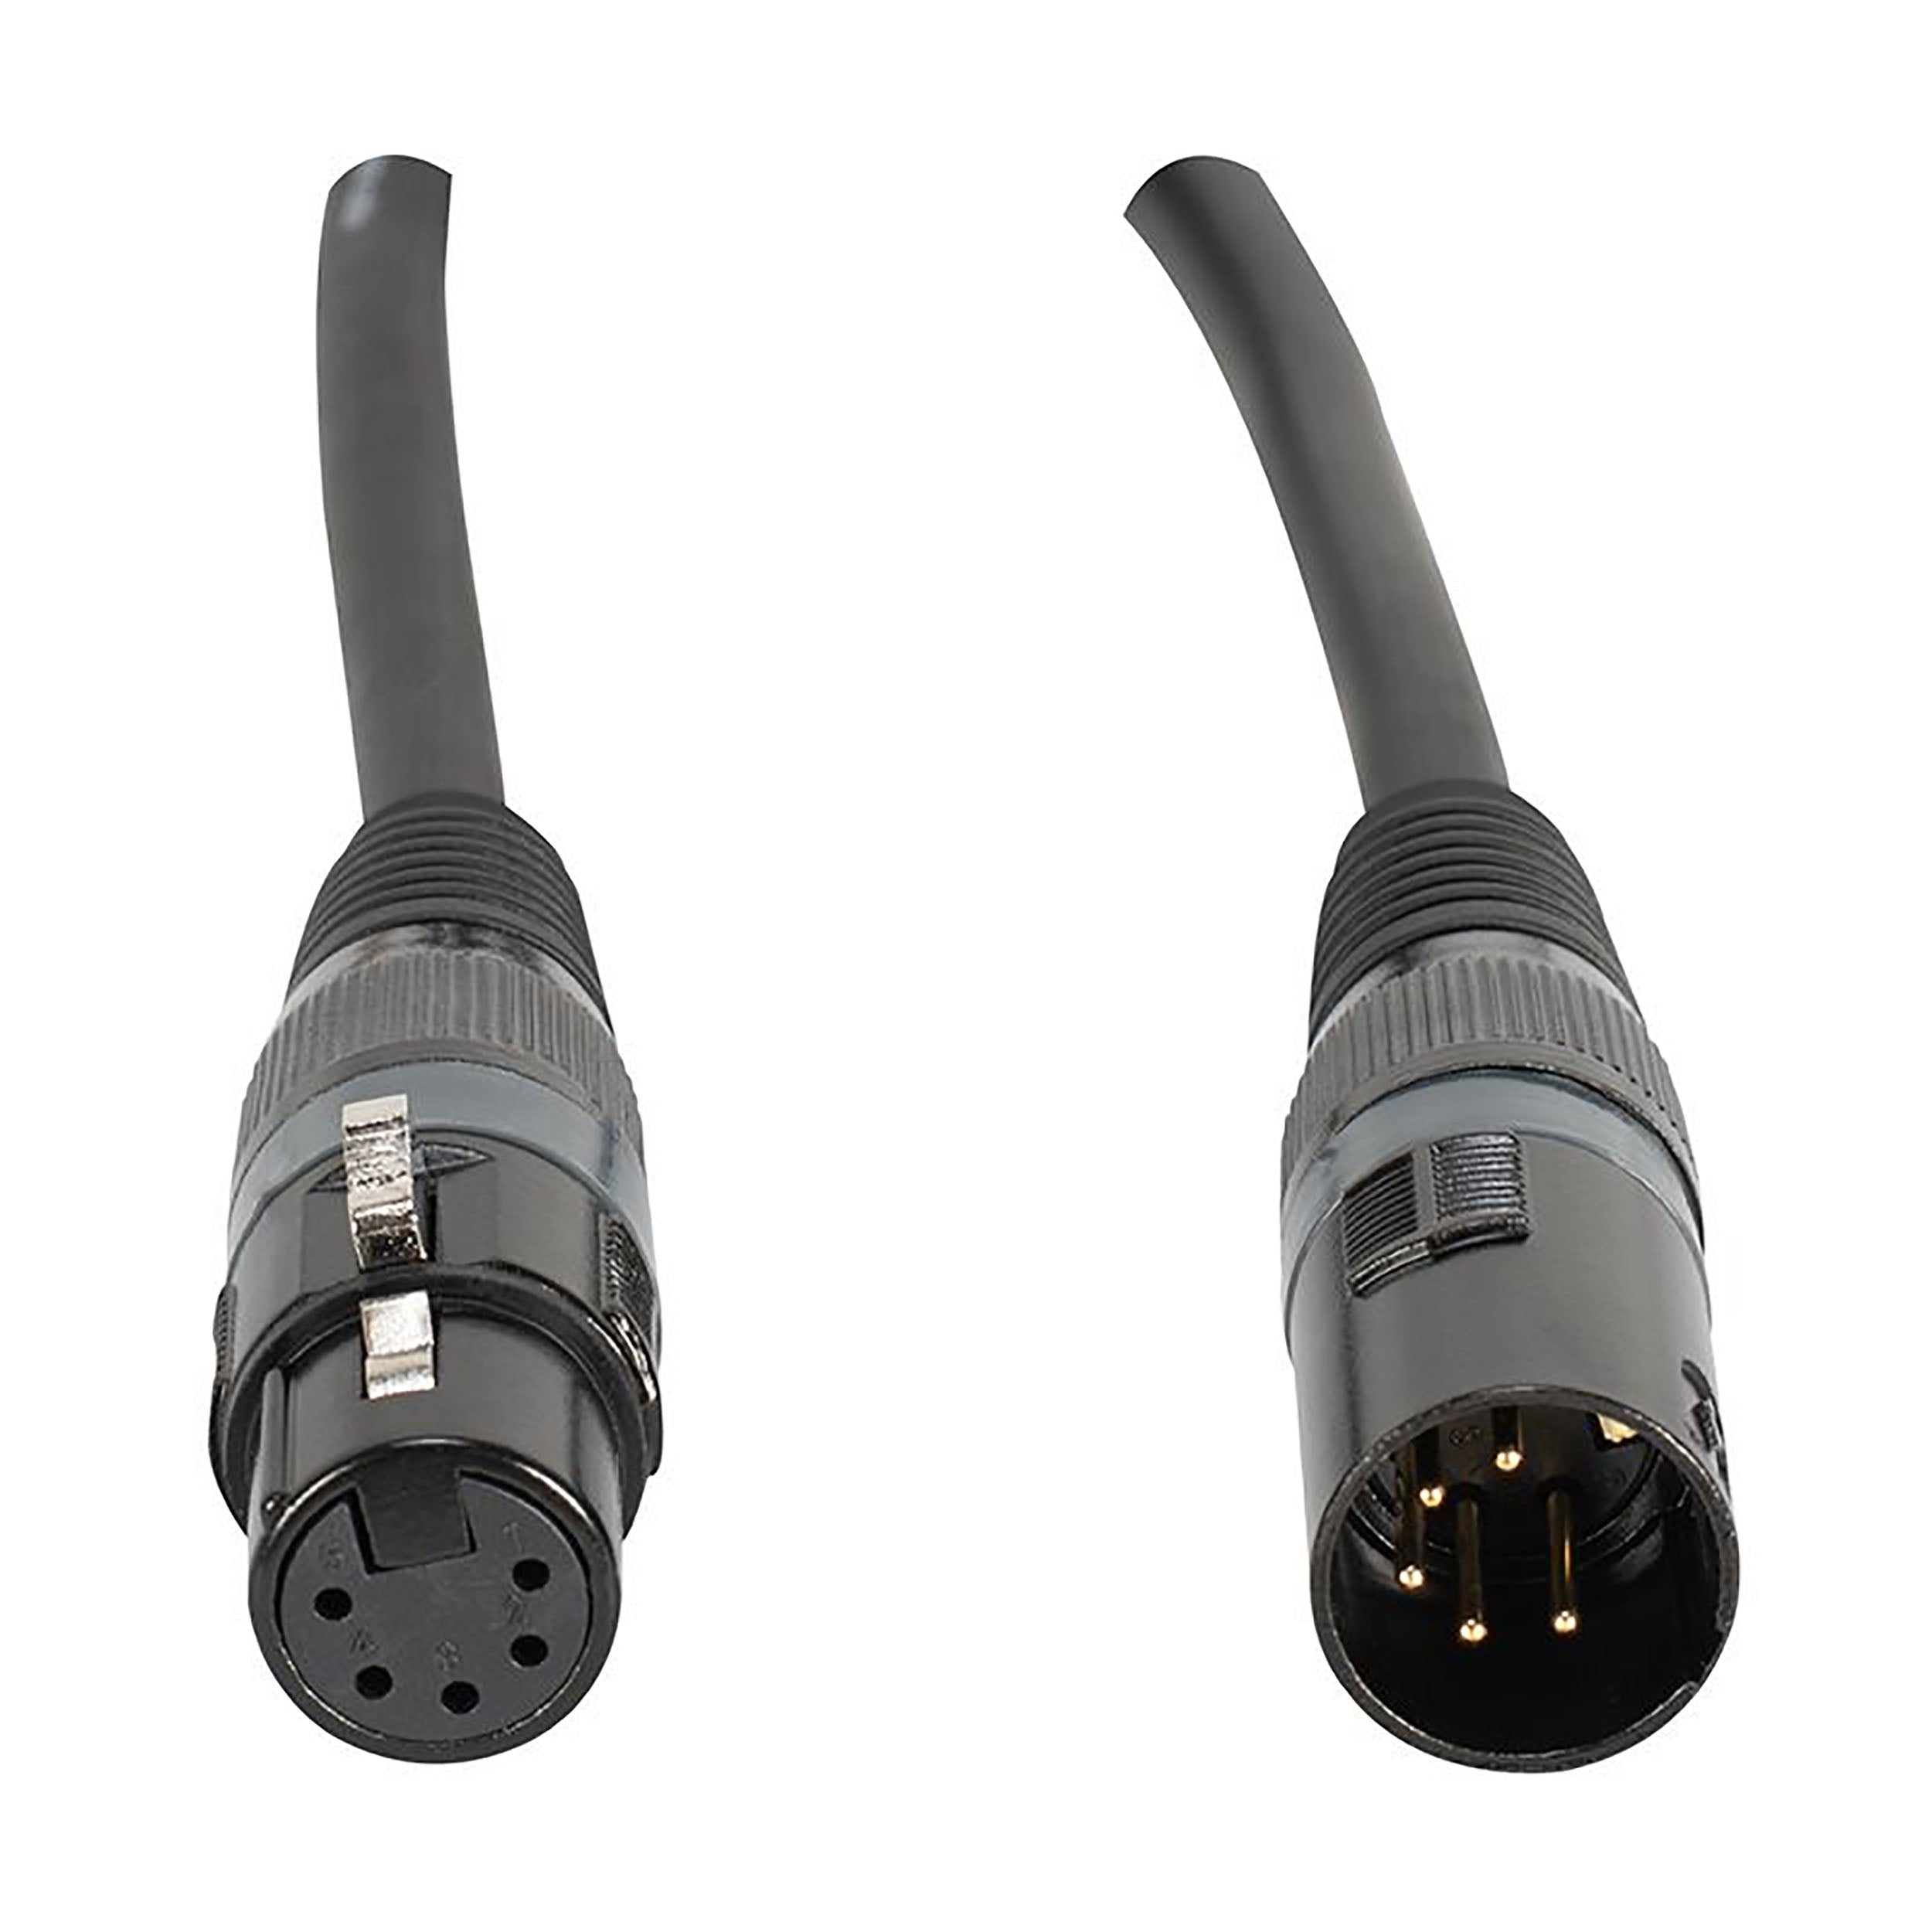 Accu-Cable AC5PDMX3, 5-Pin Male to 5-Pin Female DMX Cable - 3 Ft by Accu Cable